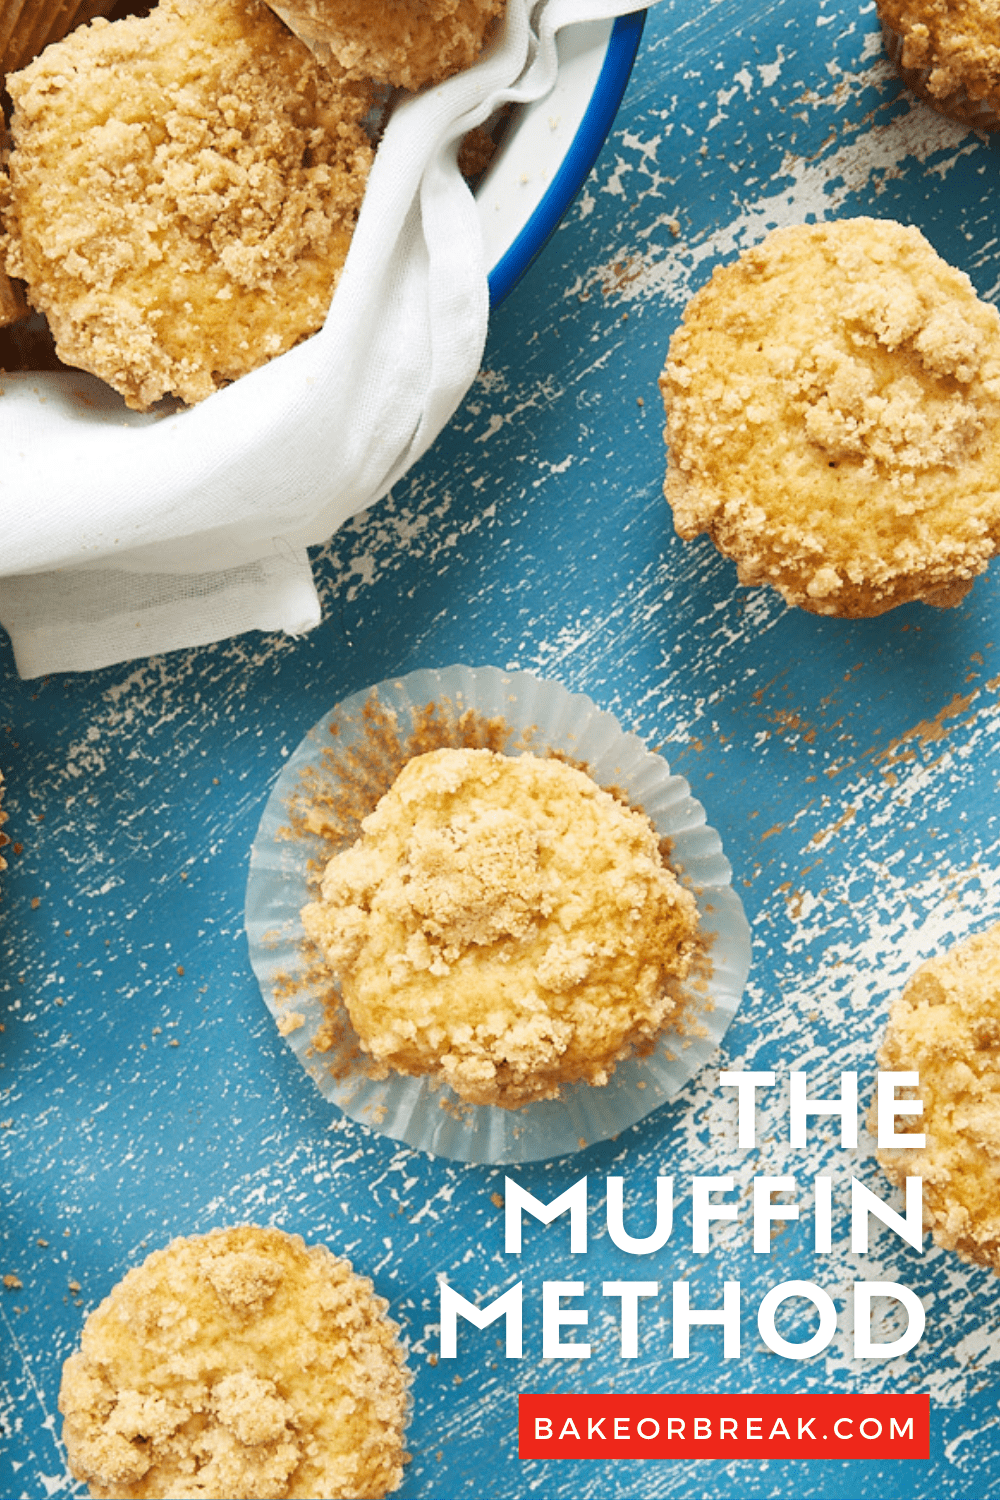 How to Keep Muffins Fresh (5 Simple Methods) - Baking Kneads, LLC